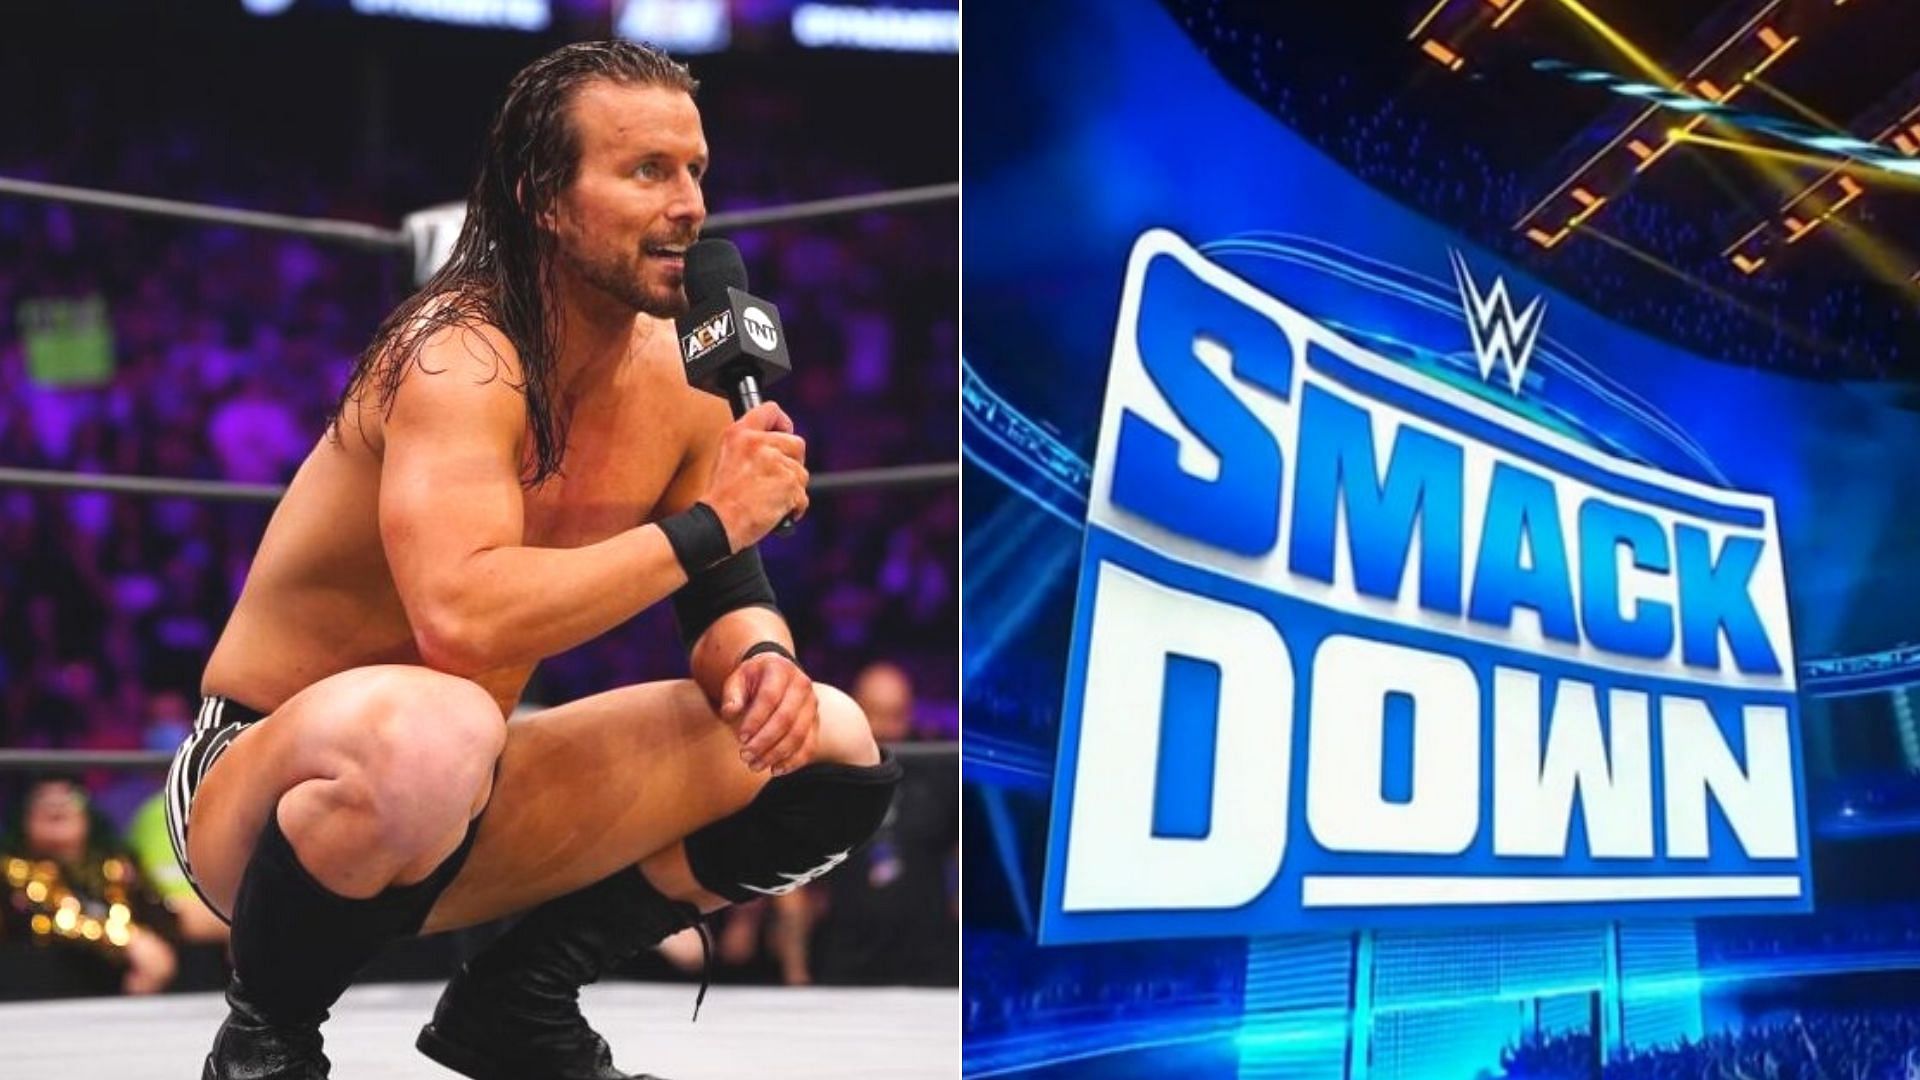 Adam Cole had a personal feud with this SmackDown star two years ago.